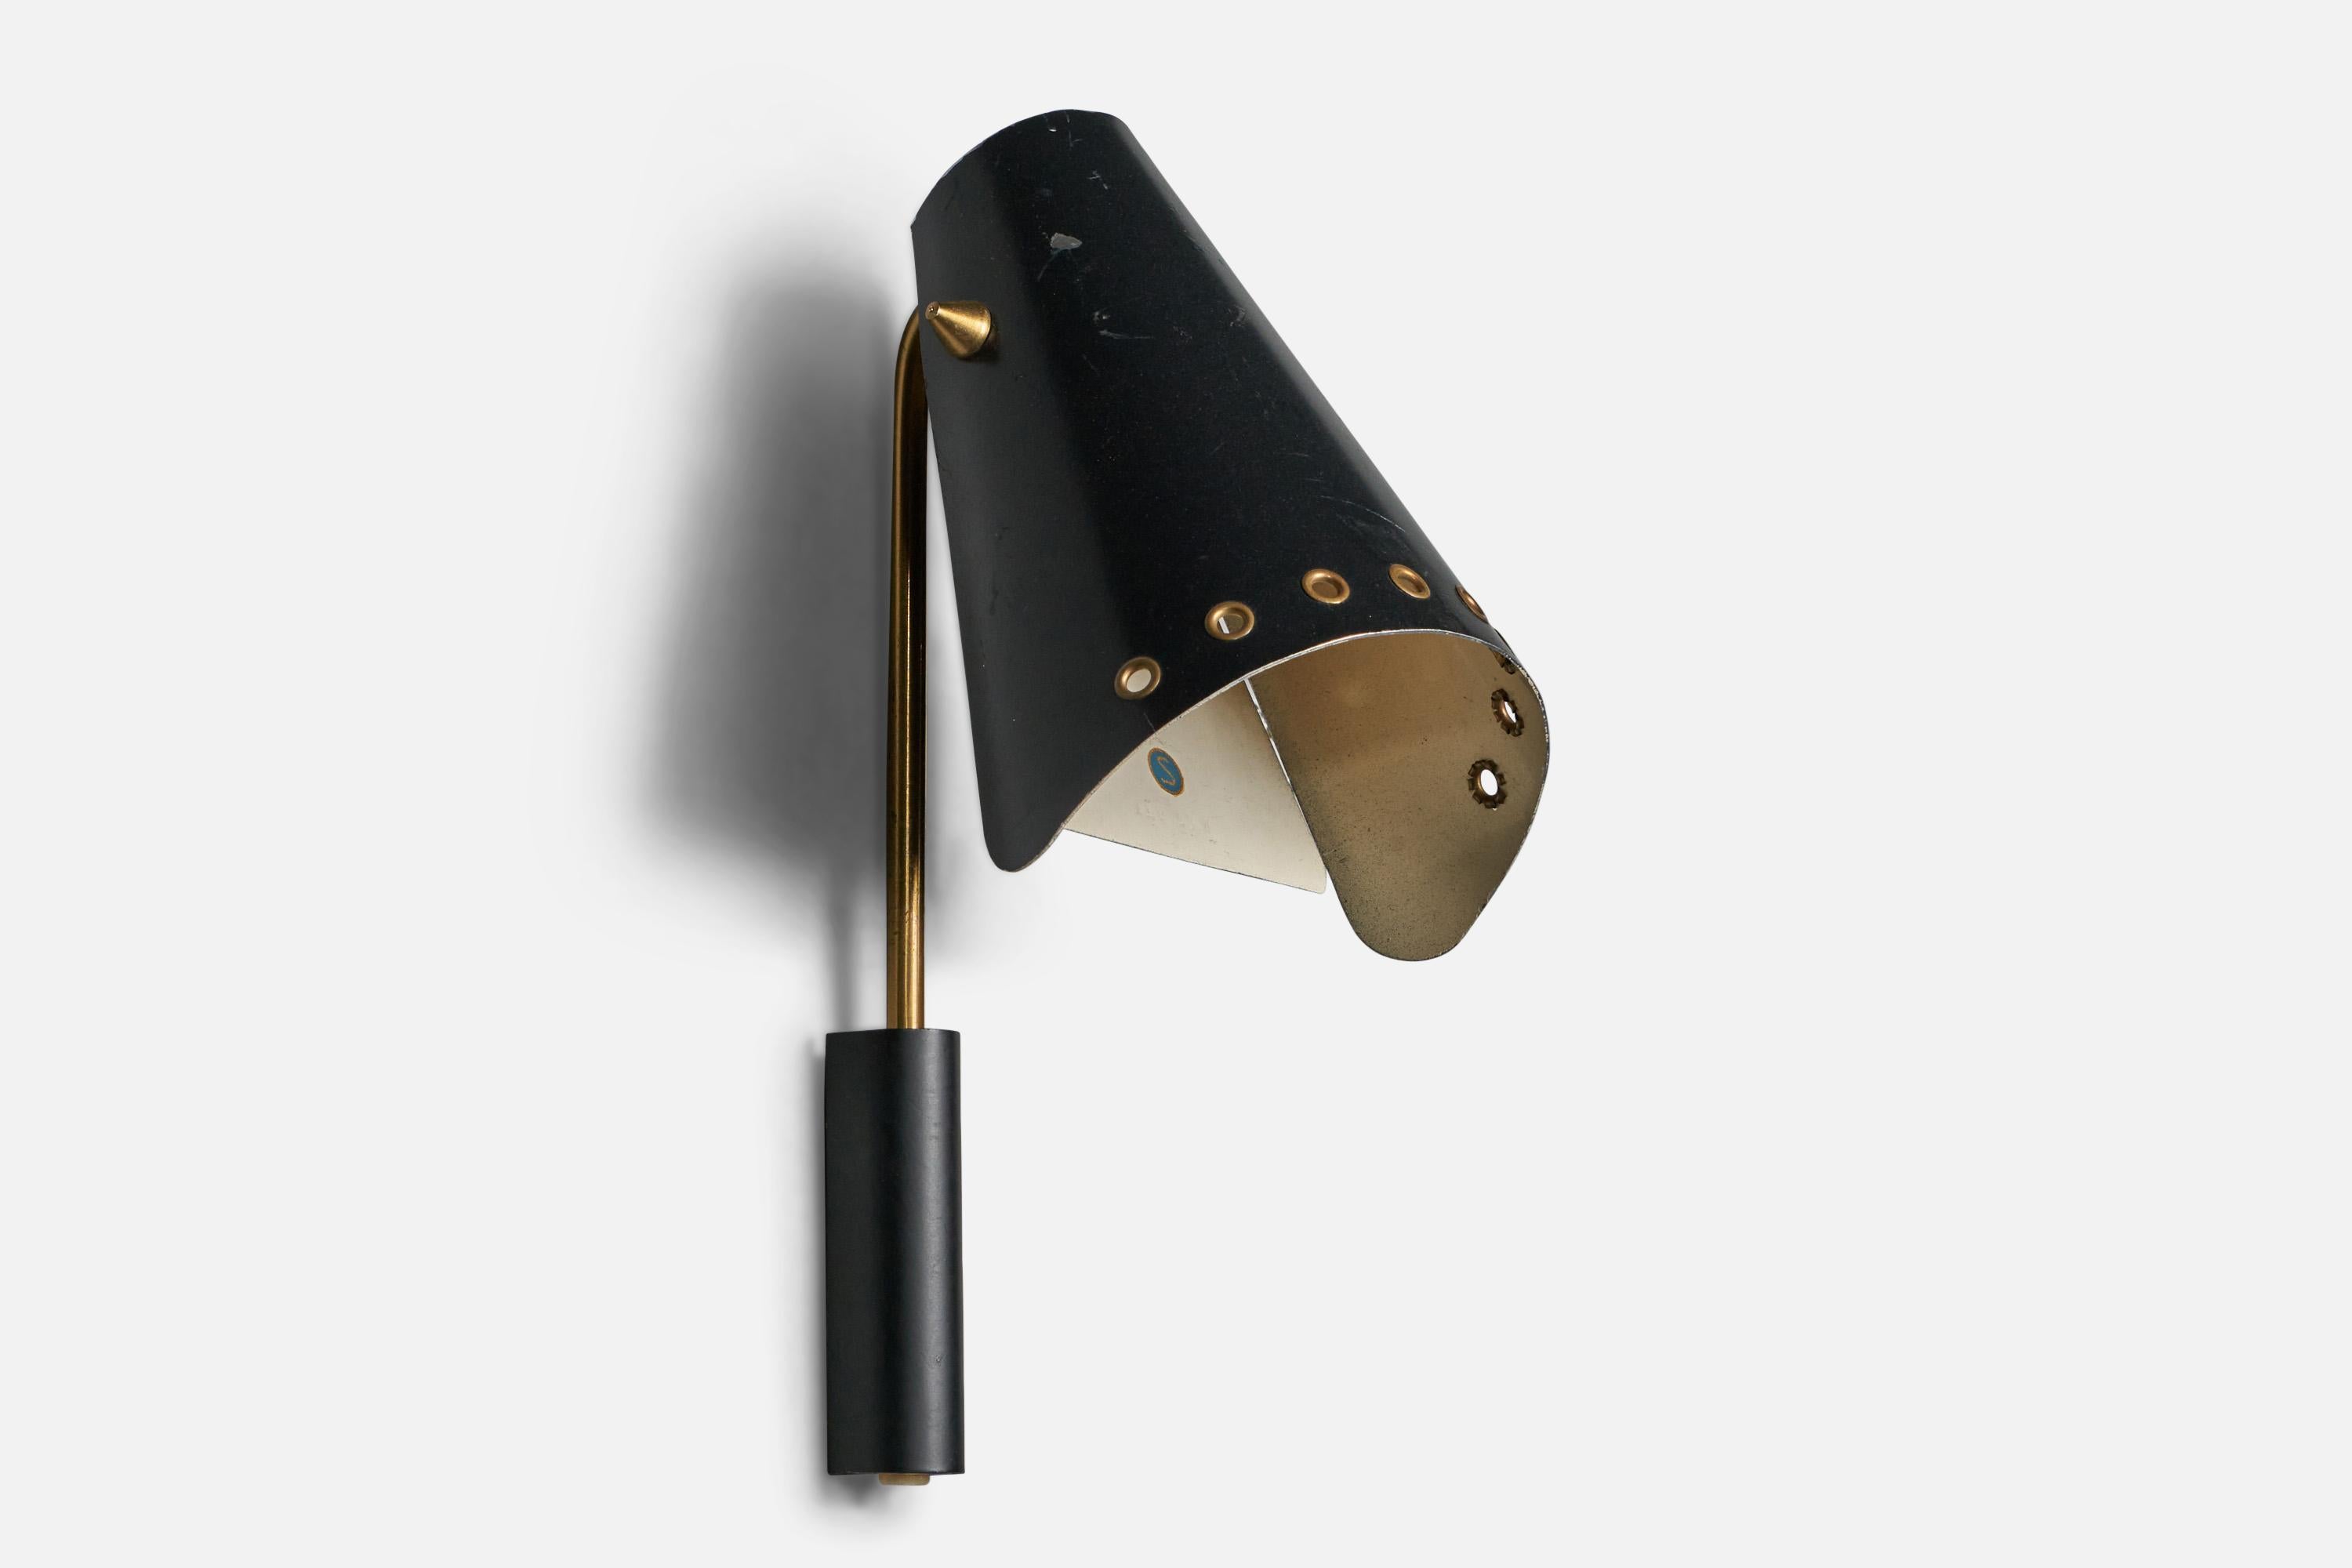 An adjustable black-lacquered metal and brass wall light, designed and produced by Fåglavik, Sweden, c. 1940s.

Overall Dimensions (inches): 13.15